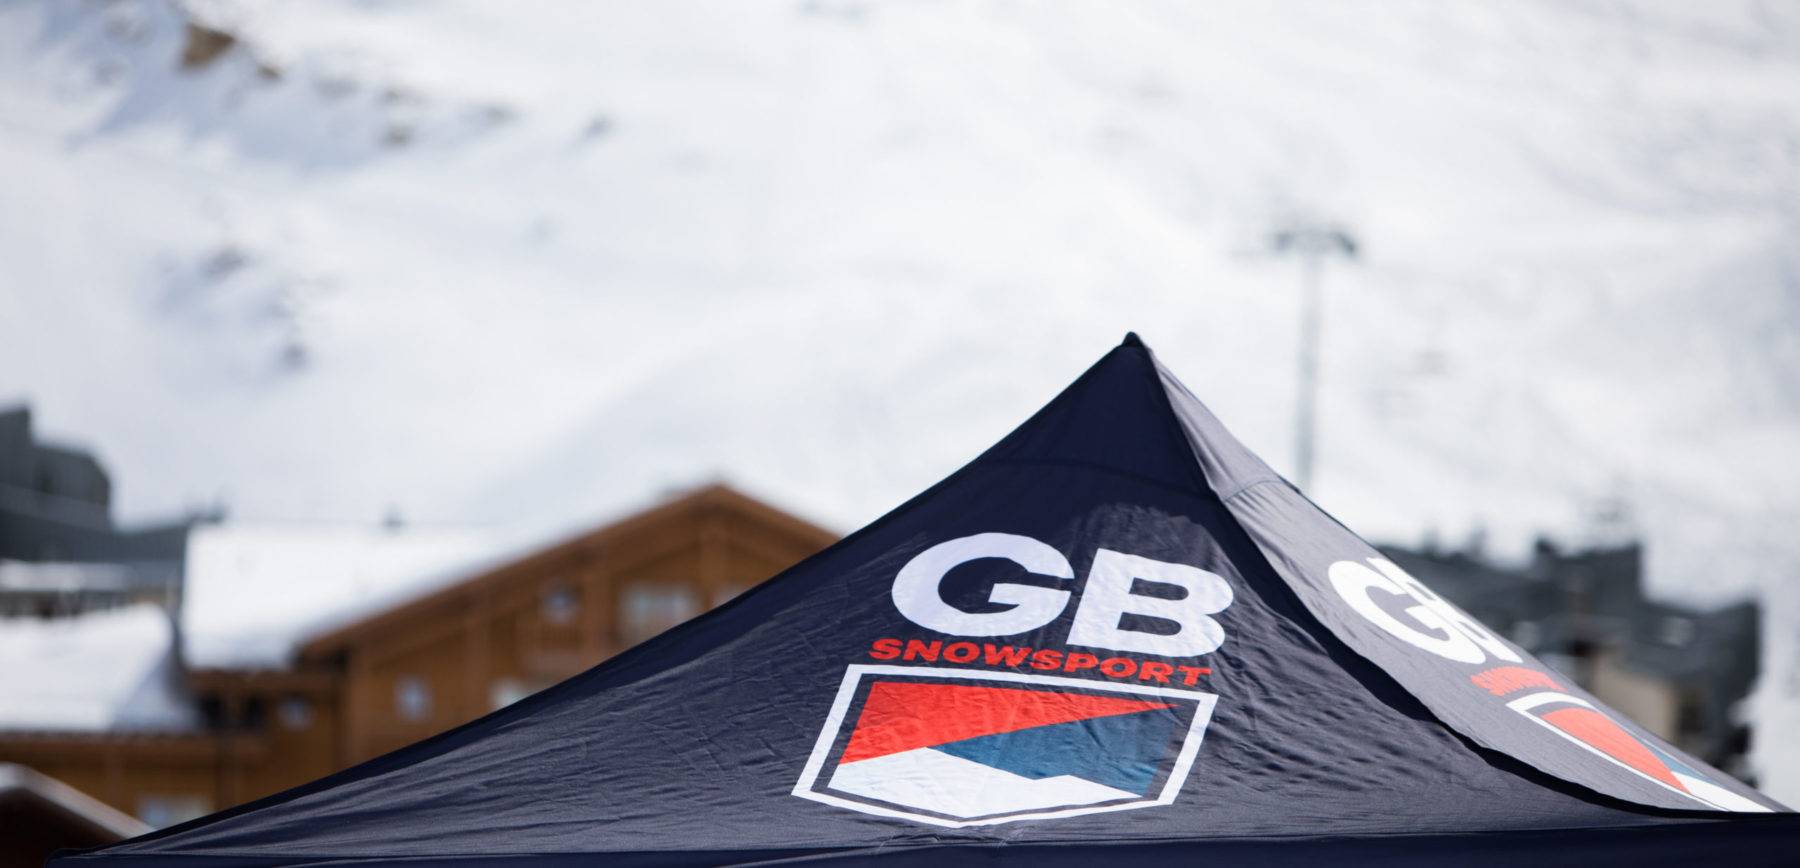 GB Snowsport welcomes Michael Oesterlin and Greg Bennett as new Independent Non-Executive Directors